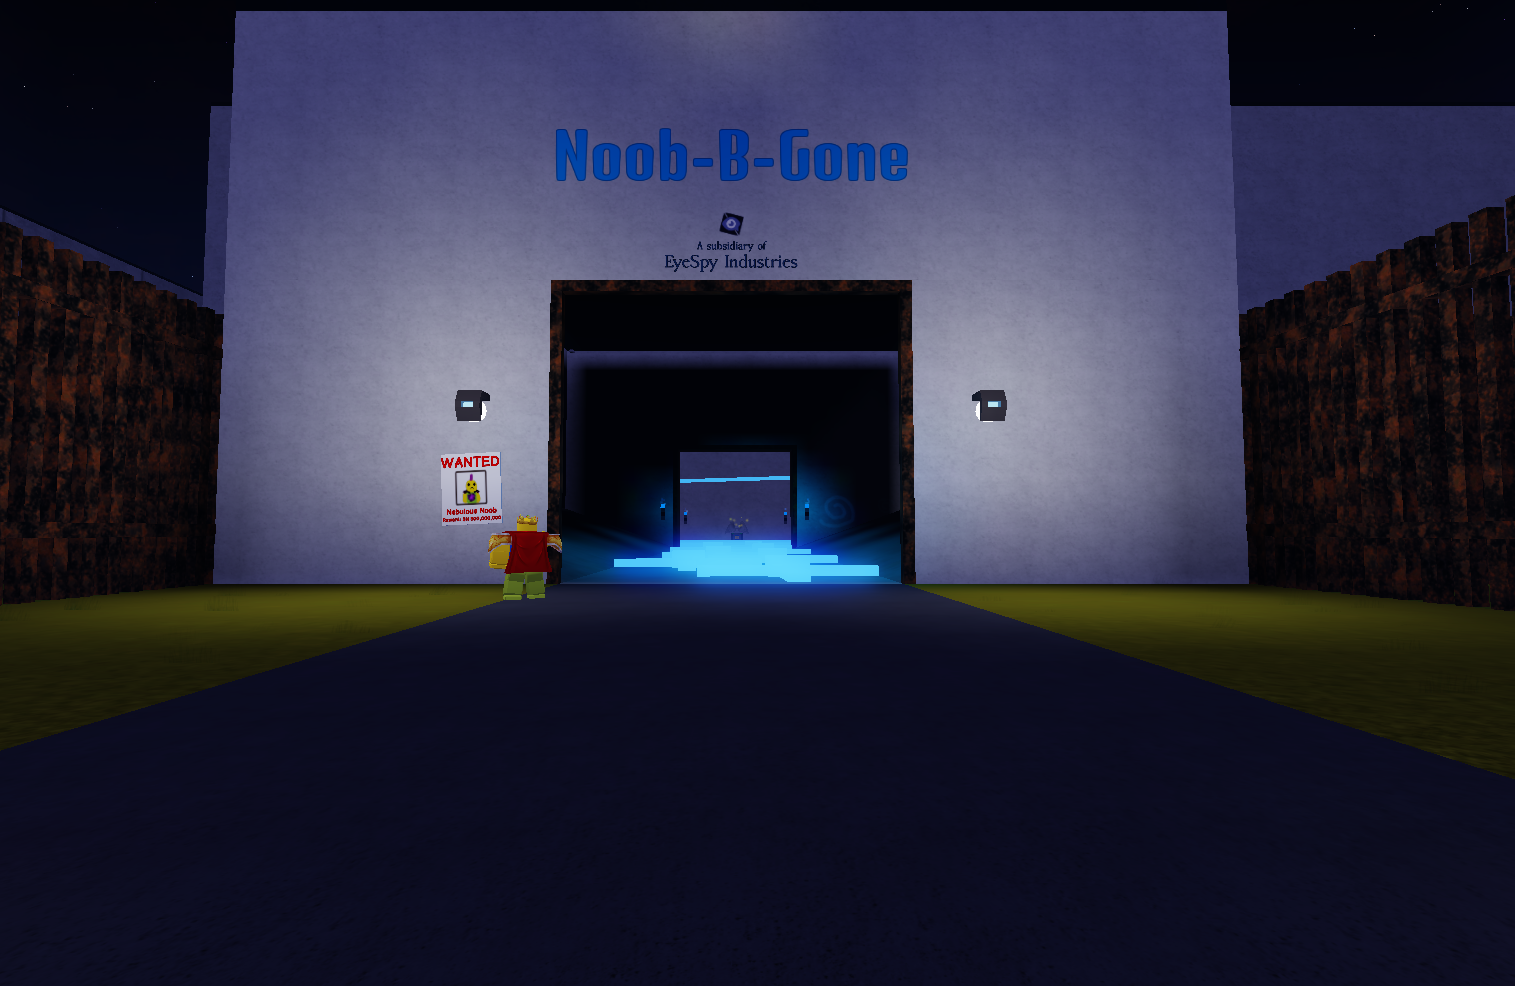 Protagonist, The Day The Noobs Took Over Roblox Wiki